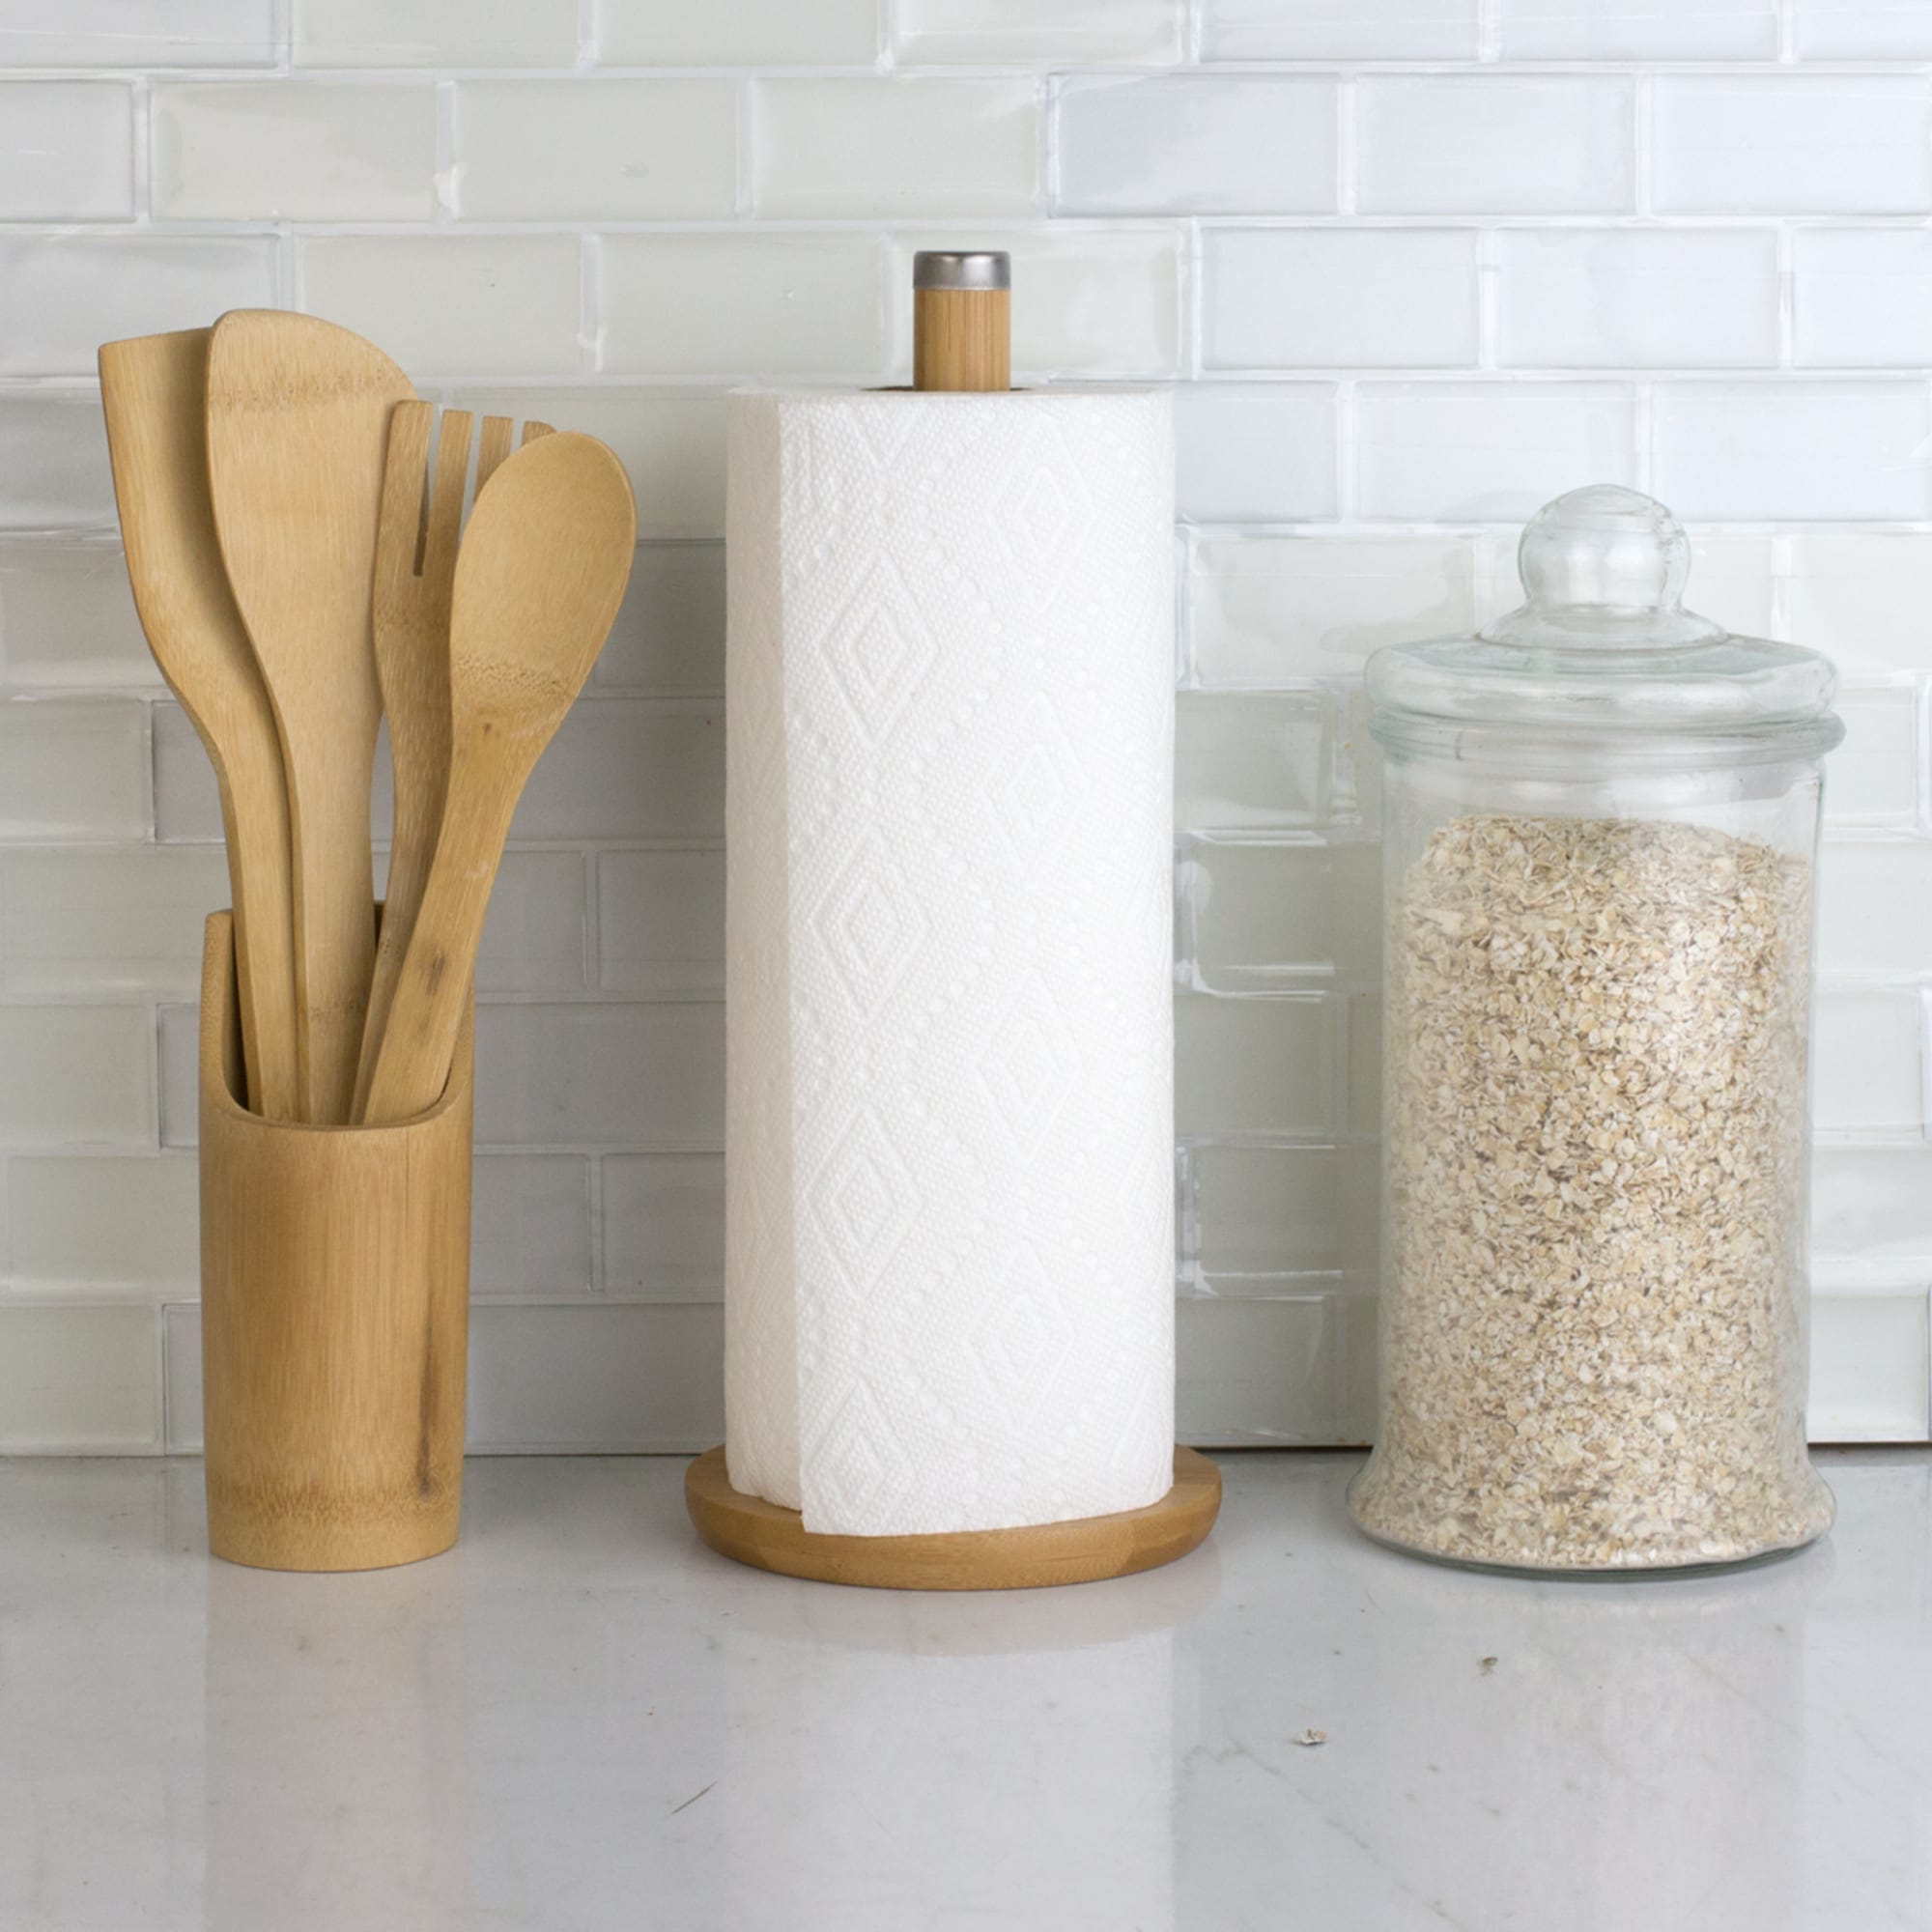 Home Basics Bamboo Paper Towel Holder with Stainless Steel Finial $4.00 EACH, CASE PACK OF 12